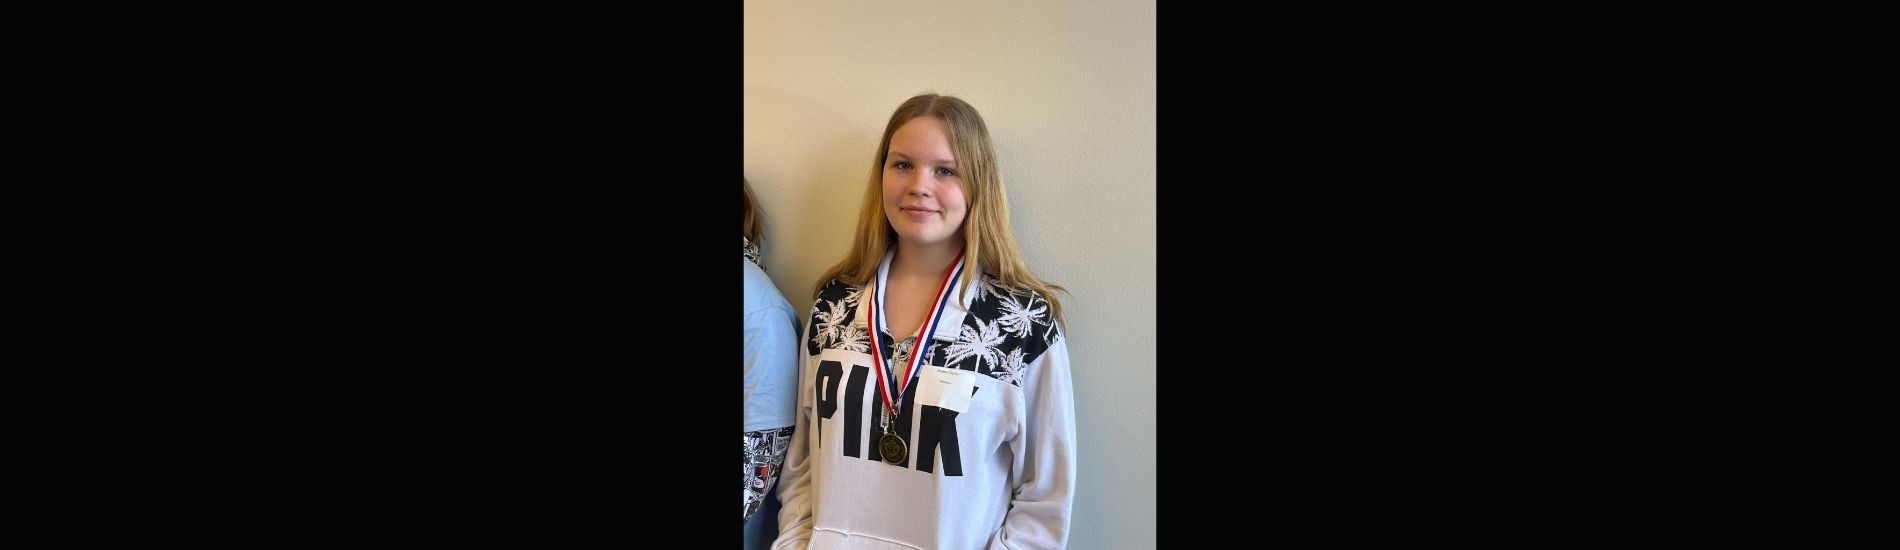 Nenna Taylor places in the top 6 for 8th graders at the Portage County Math 24 tournament.